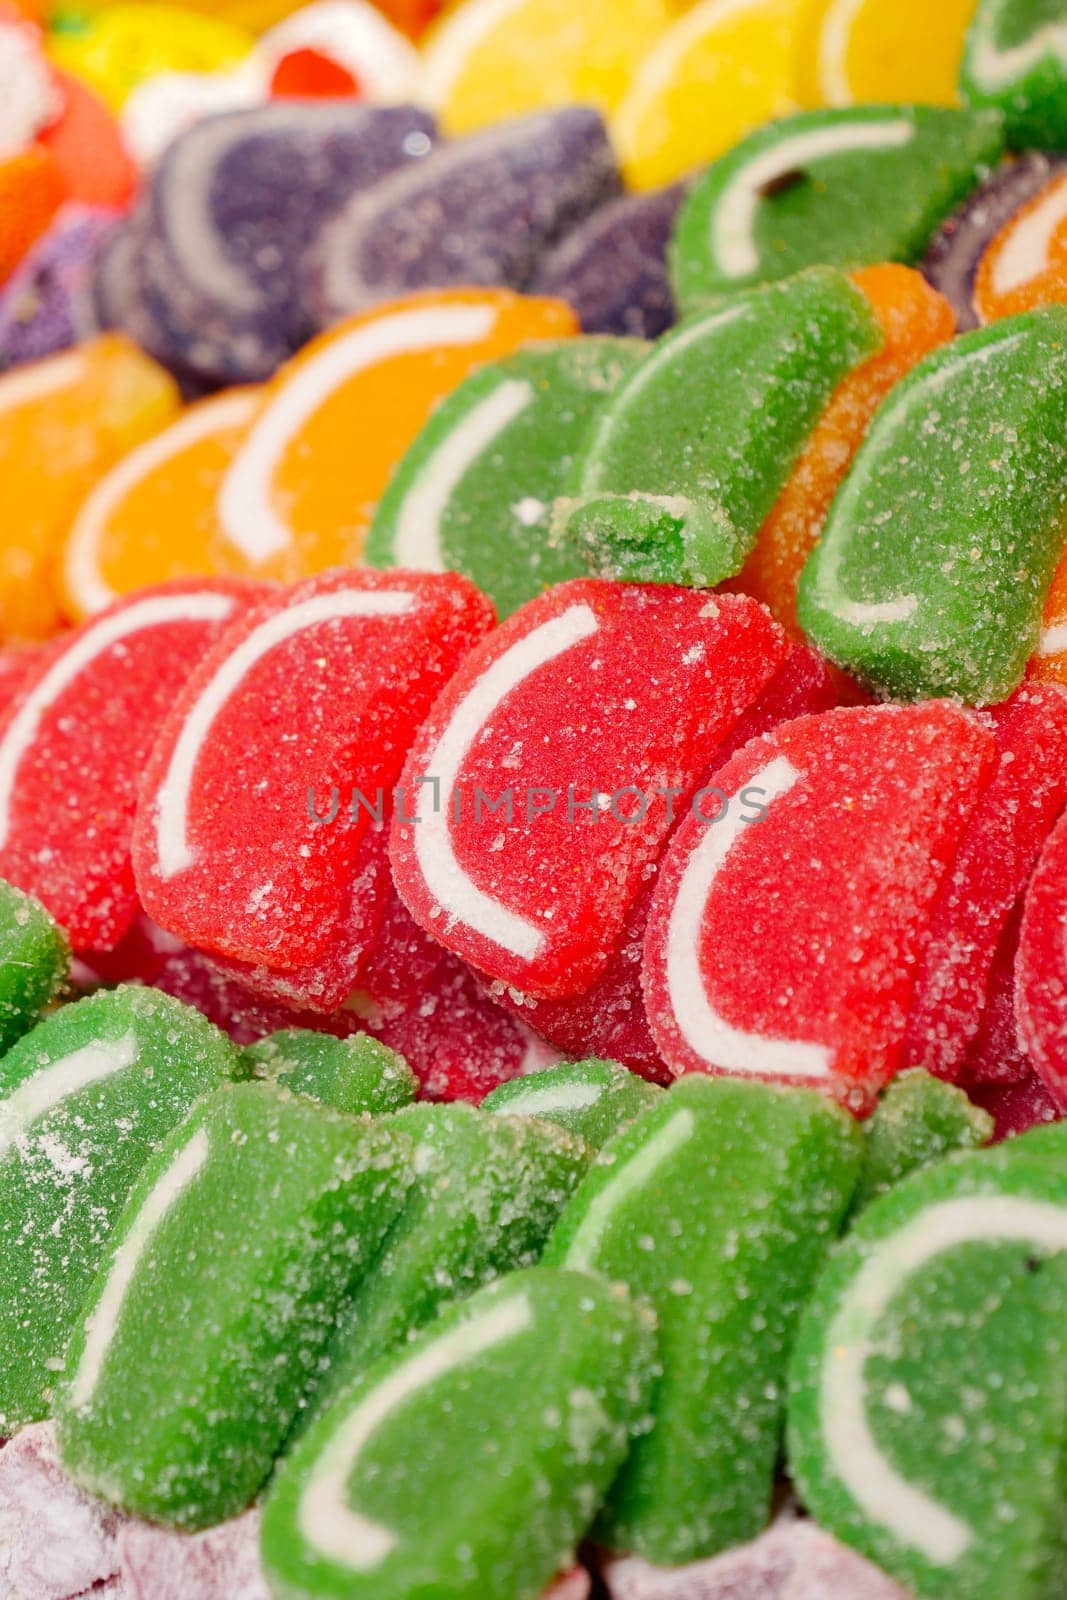 sugar coated jelly beans in the form of colored sliced fruit.